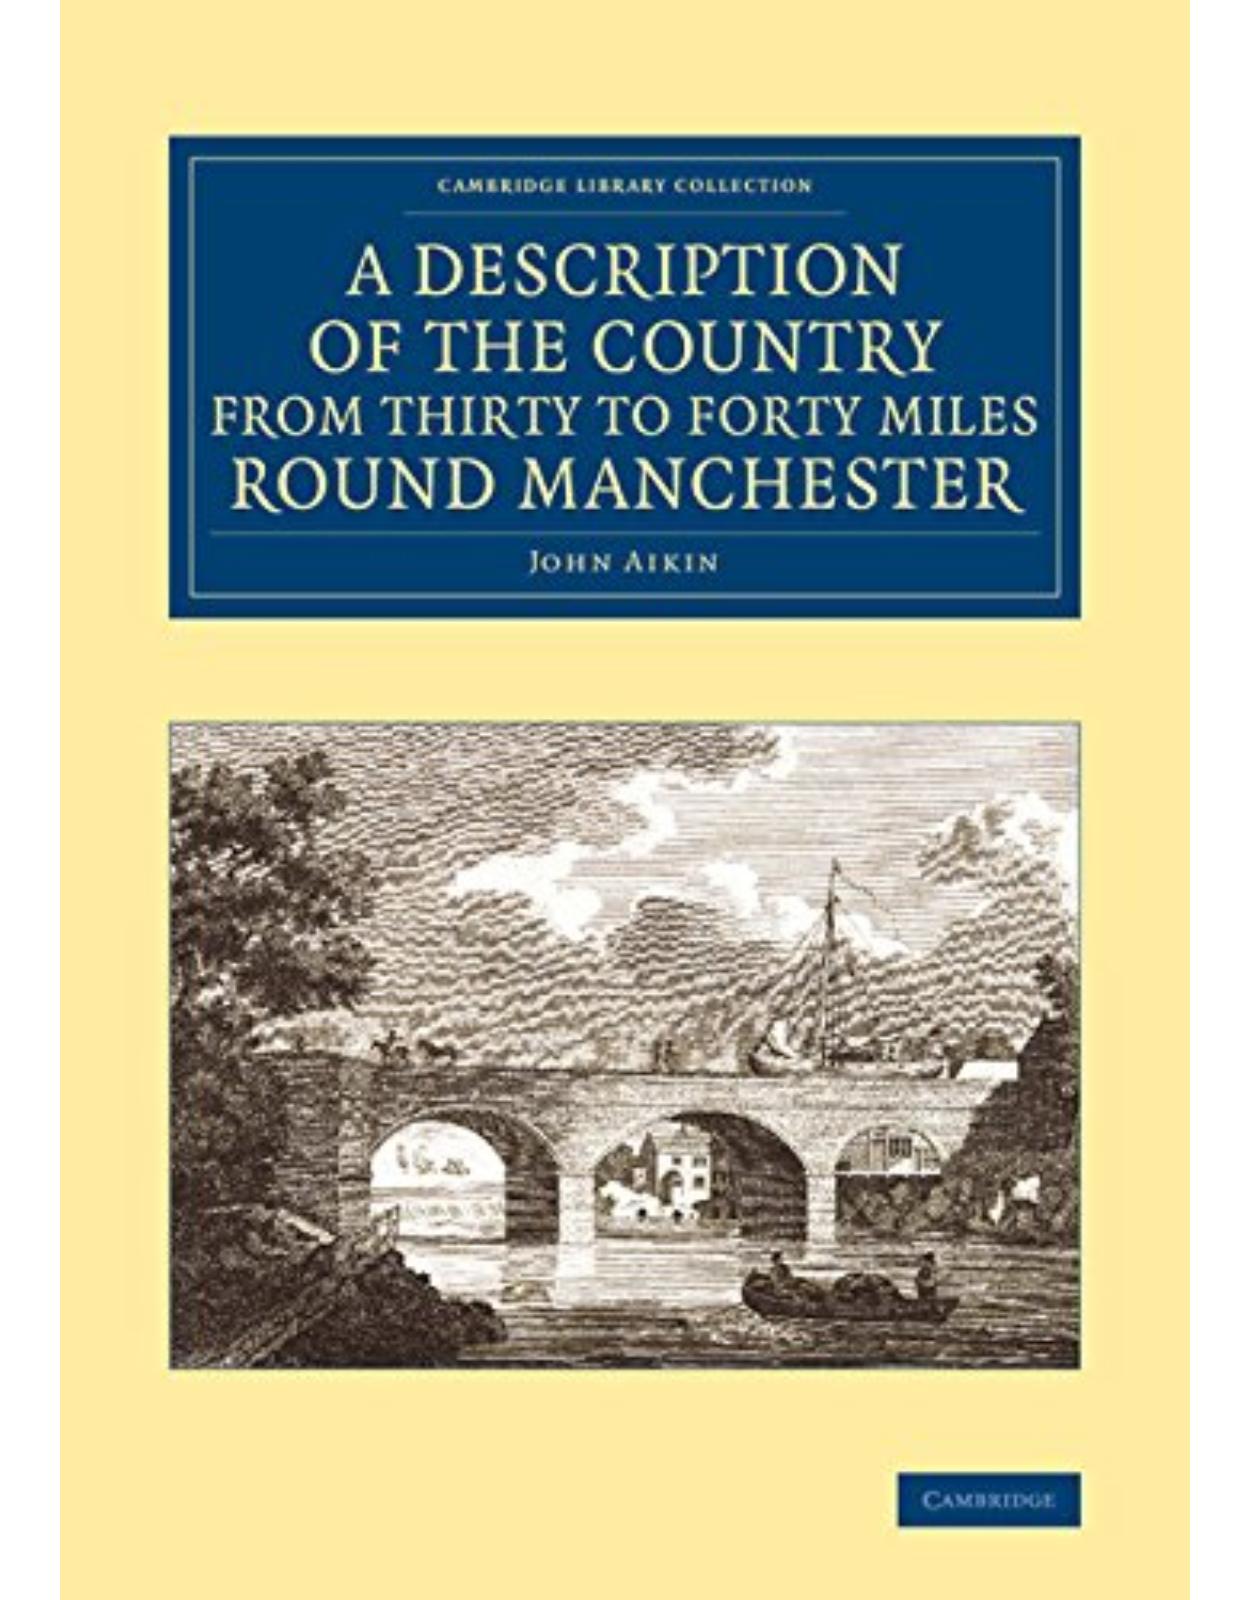 A Description of the Country from Thirty to Forty Miles round Manchester (Cambridge Library Collection - British & Irish History, 17th & 18th Centuries)